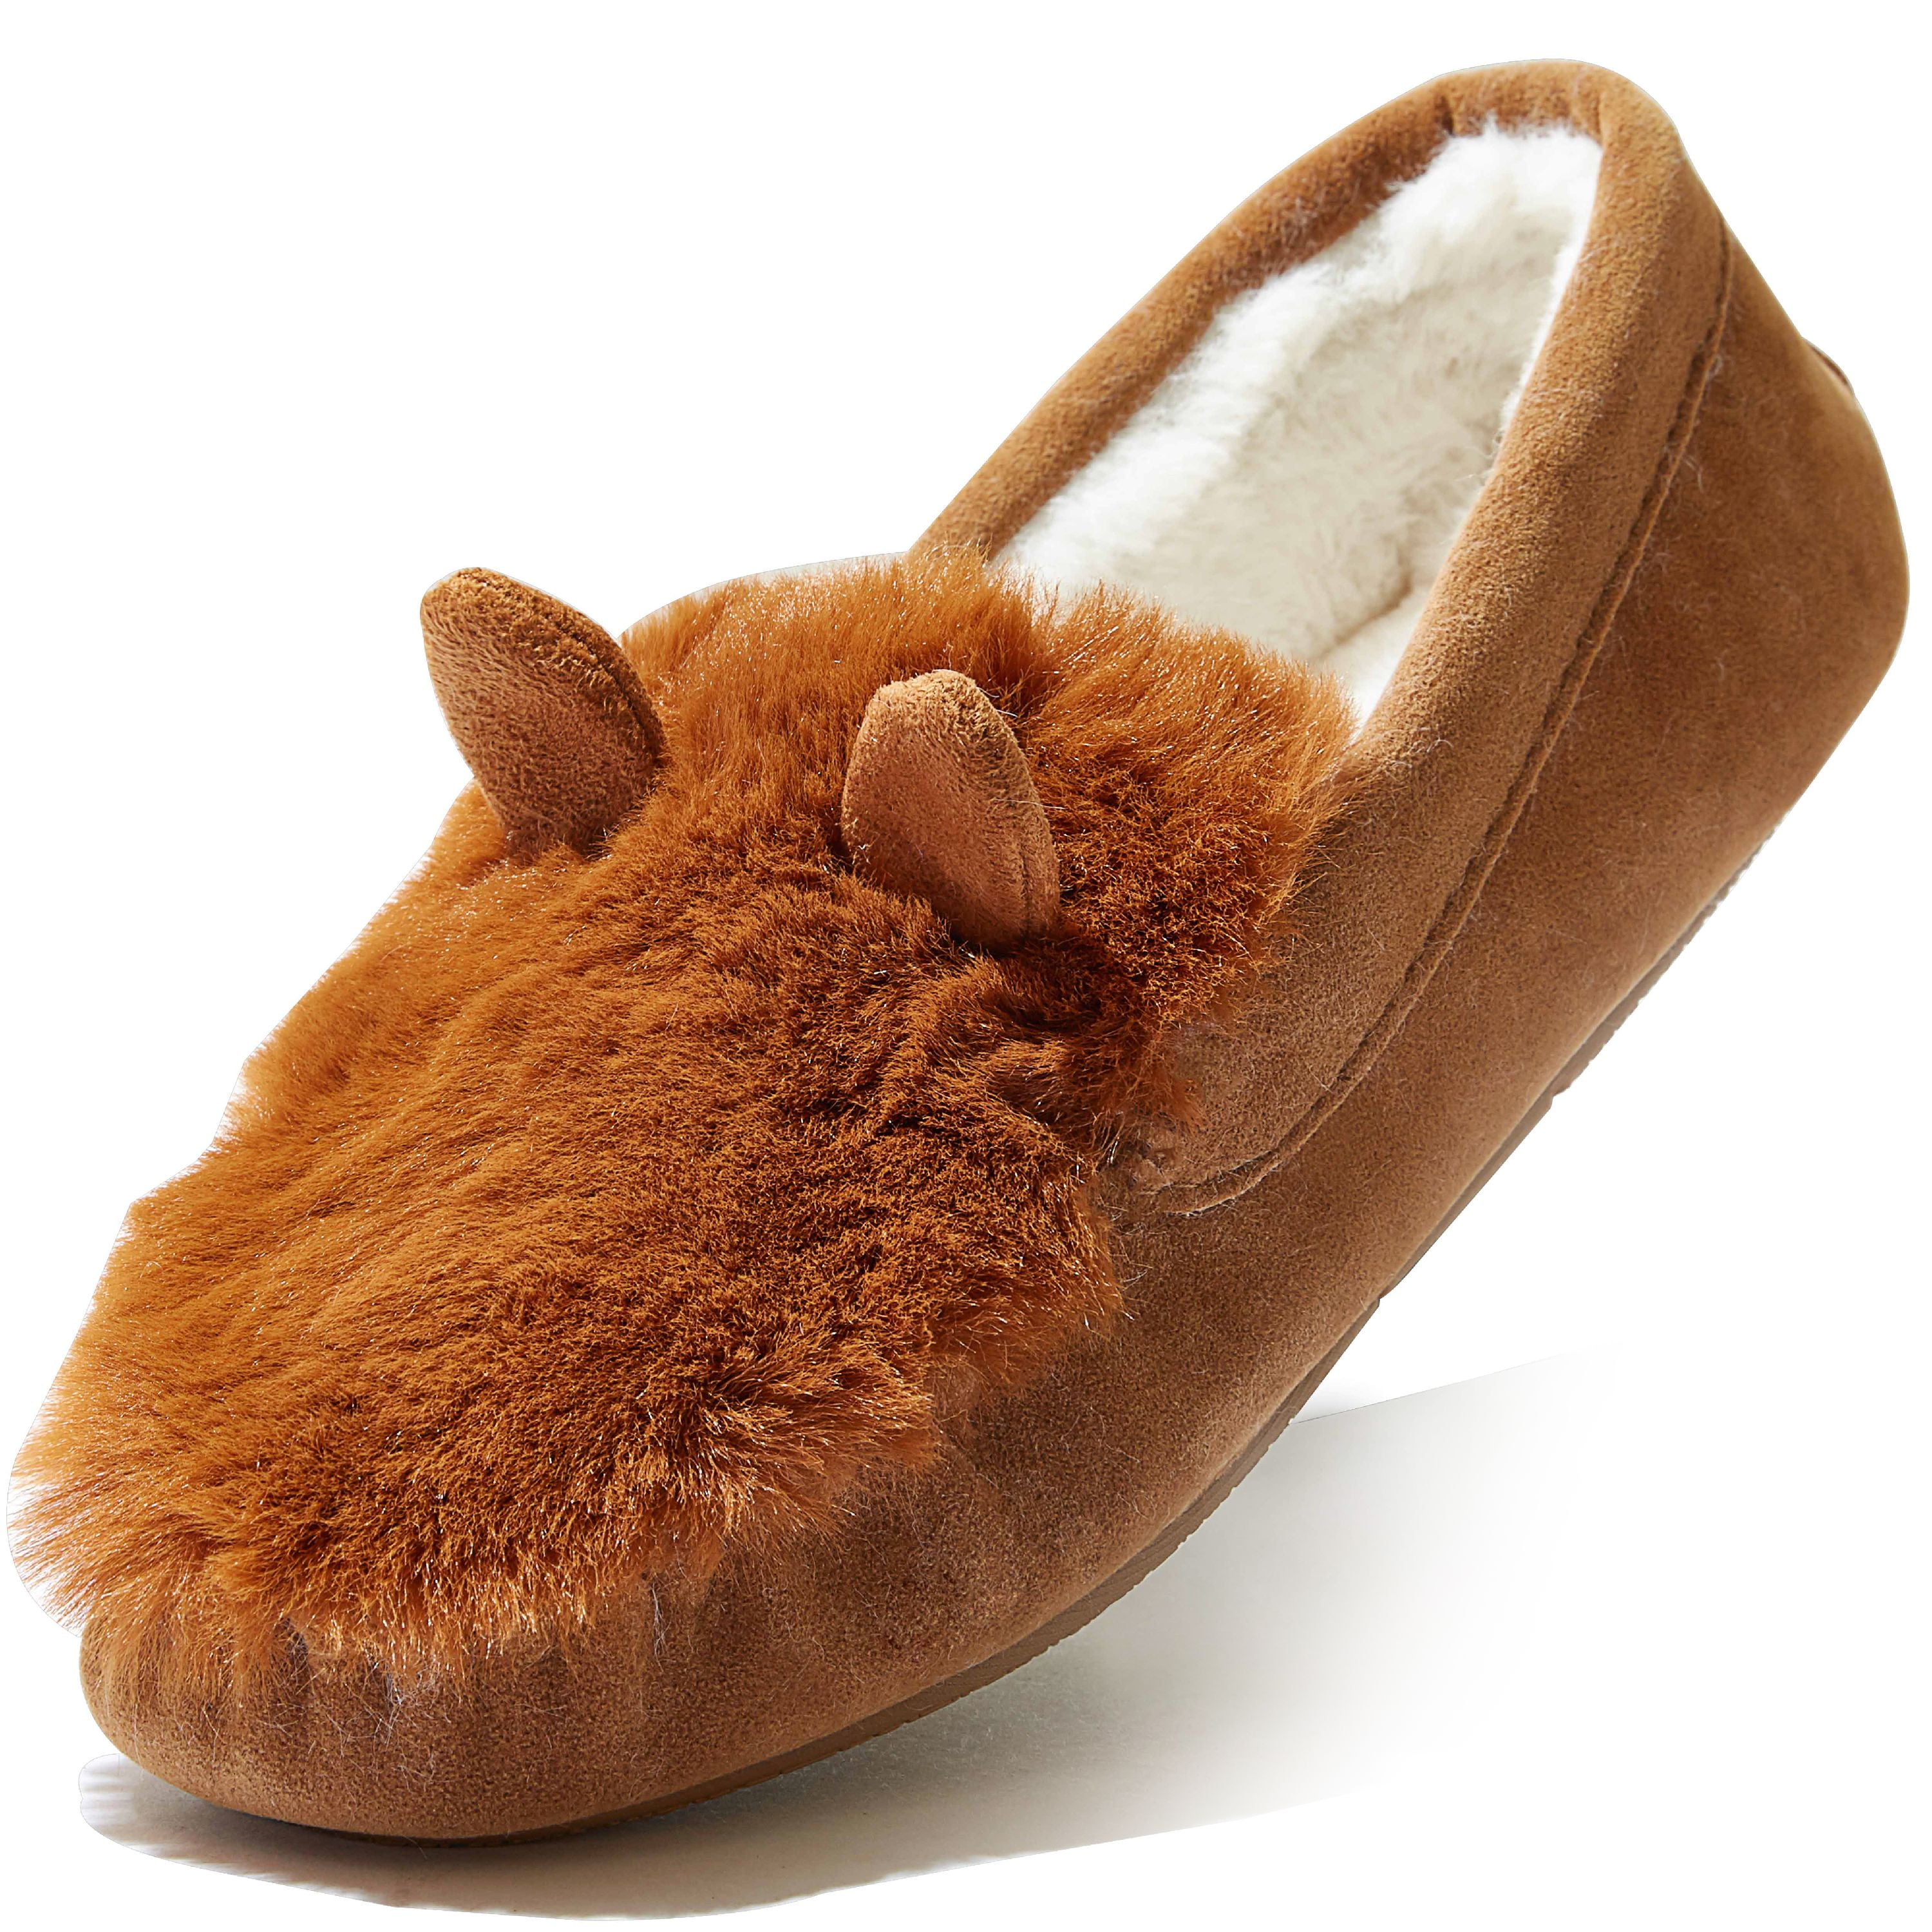 DailyShoes - DailyShoes Moccasin-Style 